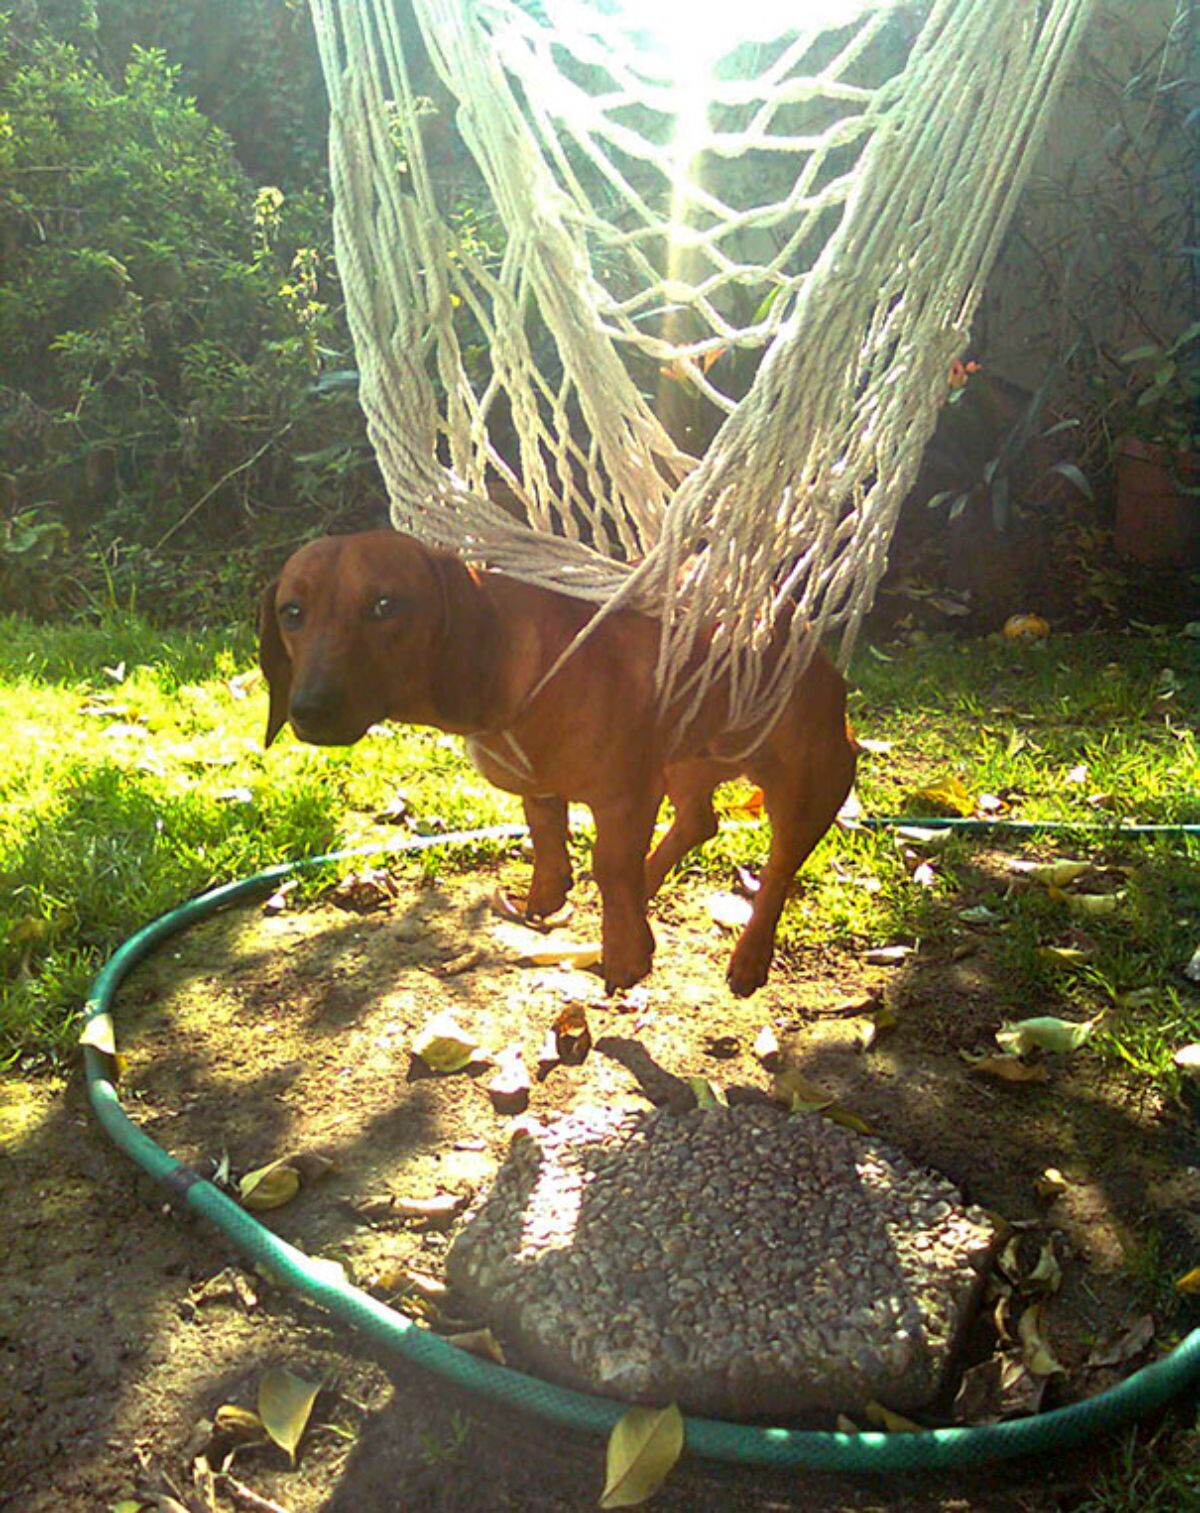 brown dog stuck through a white net hammock and suspended above the ground